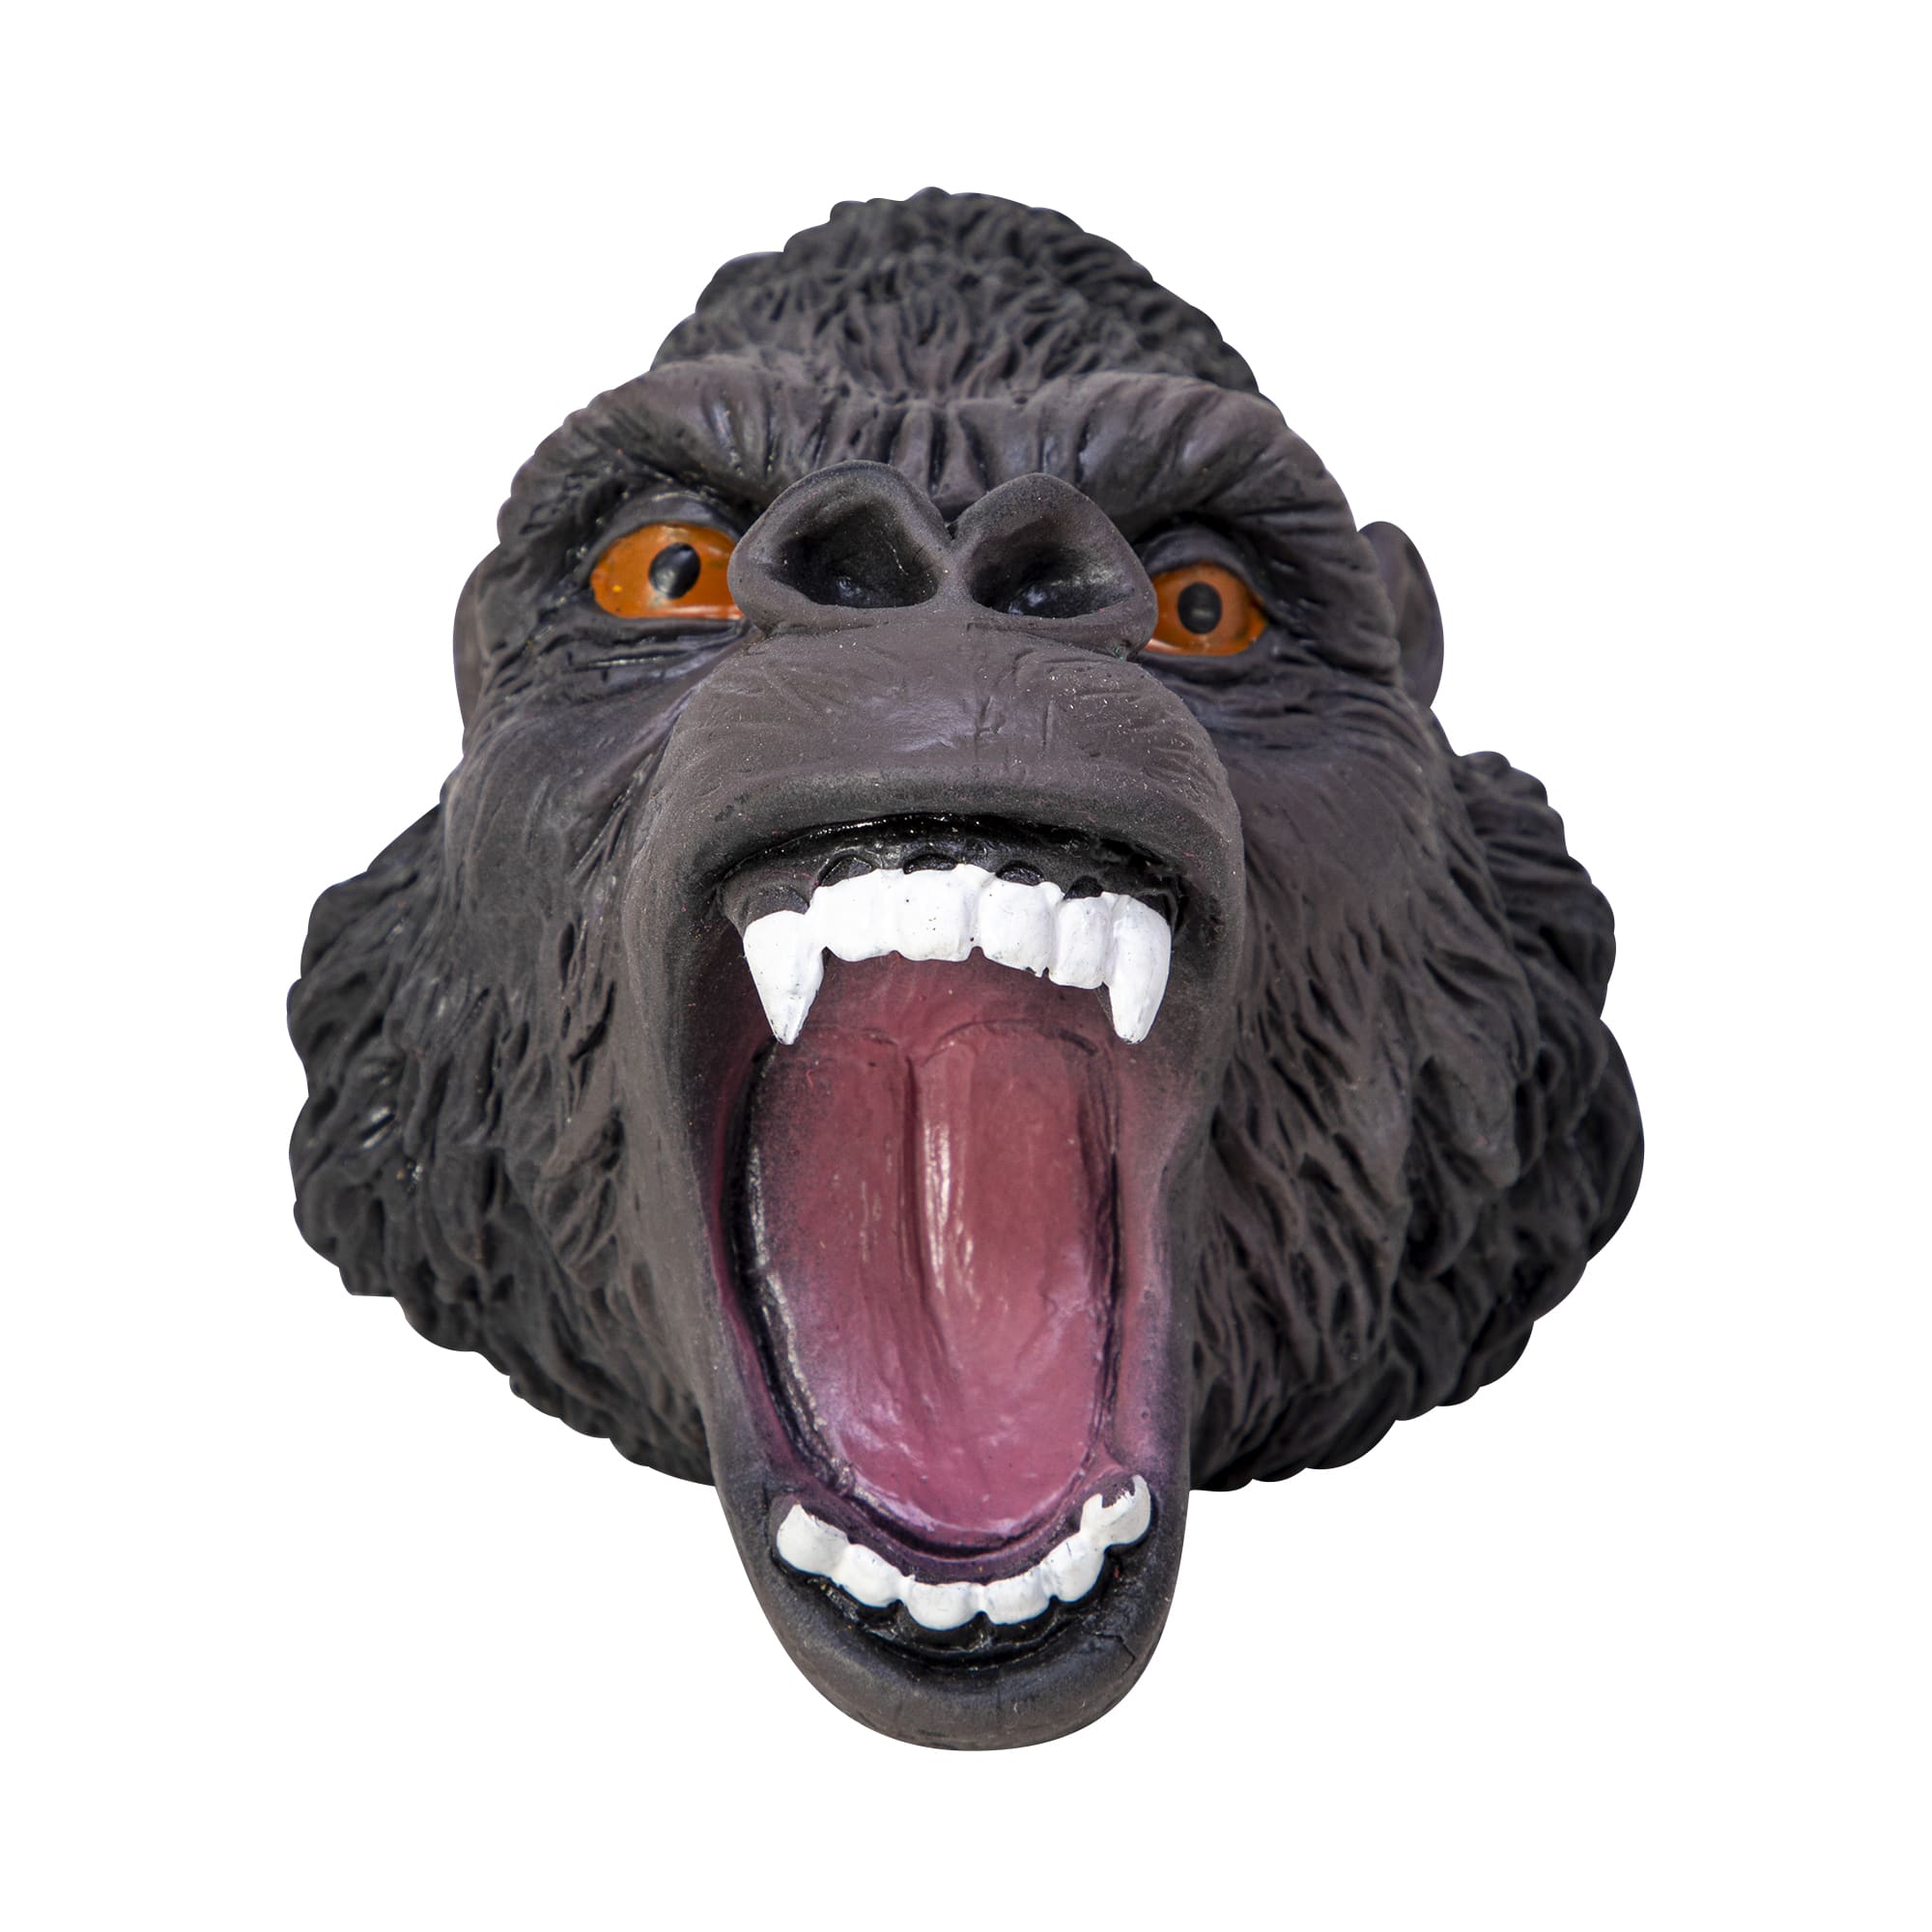 Front view of the Gorilla Hand Puppet on a person's hand.